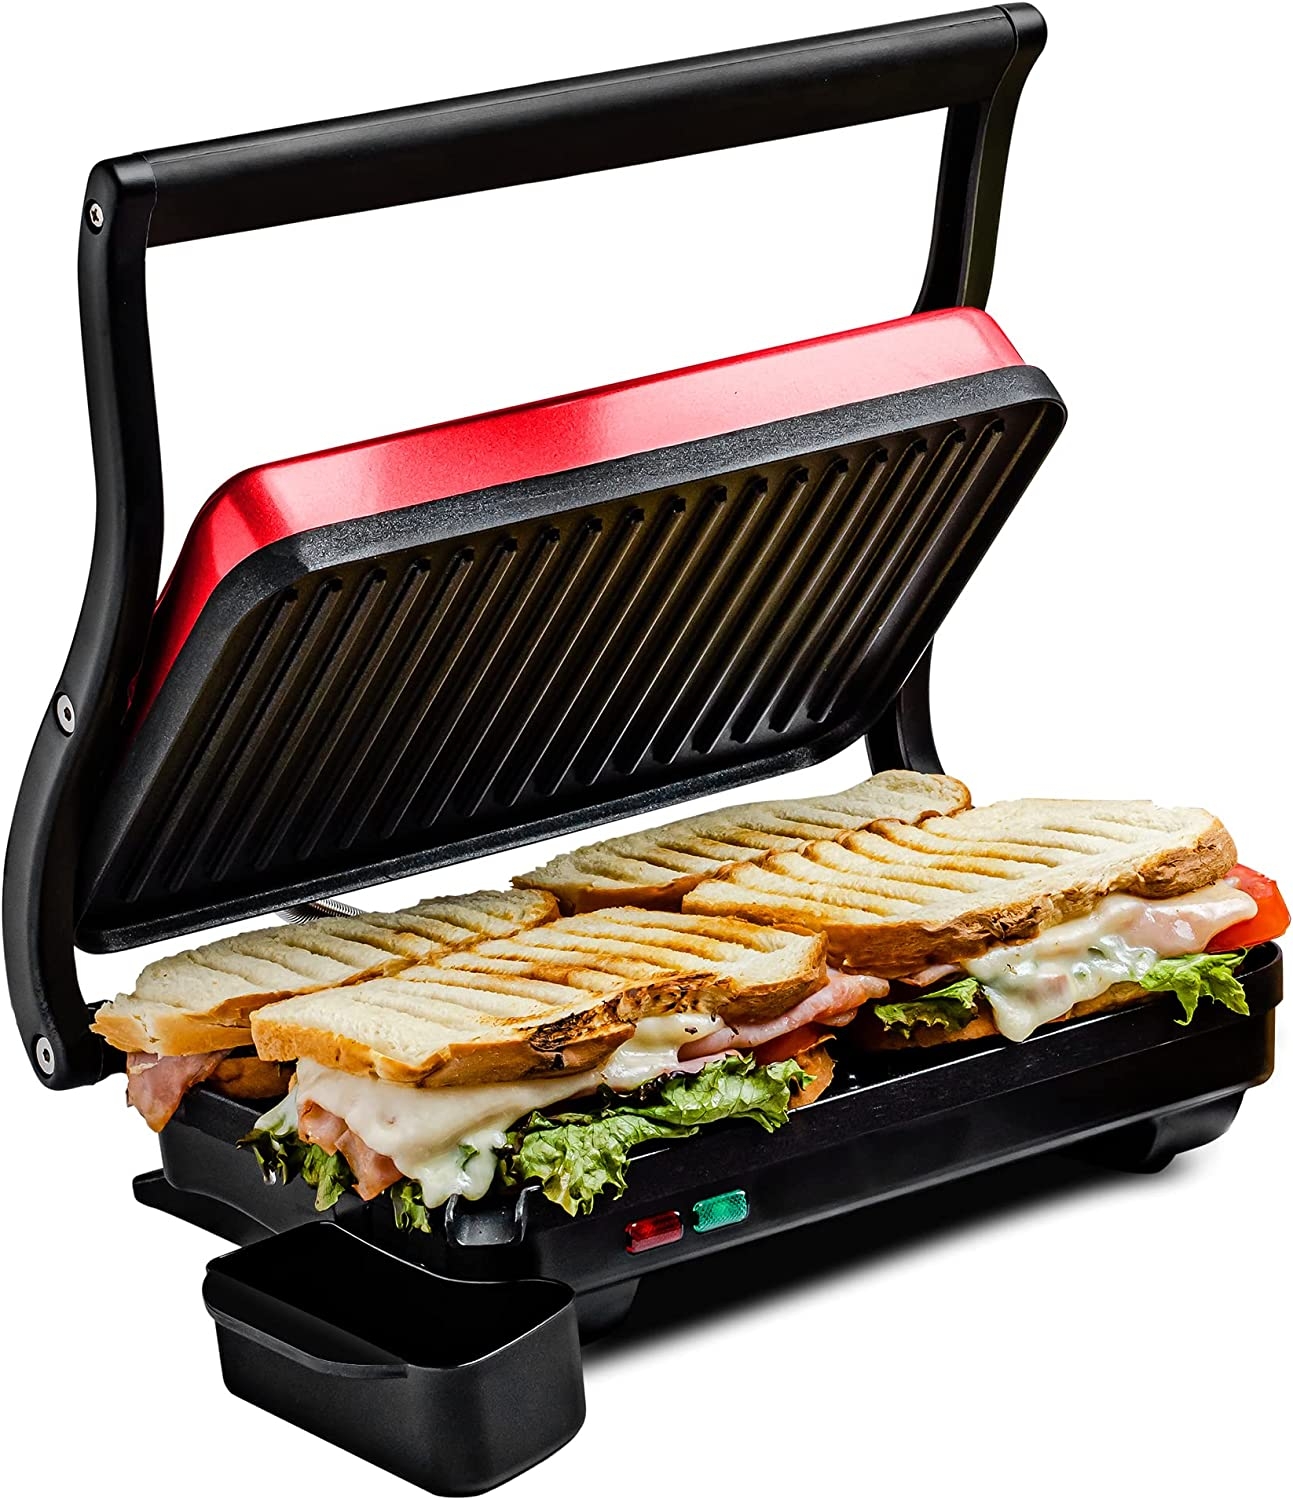 Ovente 4 Slice Electric Indoor Panini Press Grill with Non-Stick Double Flat Cast Iron Cooking Plates & Removable Drip Tray,